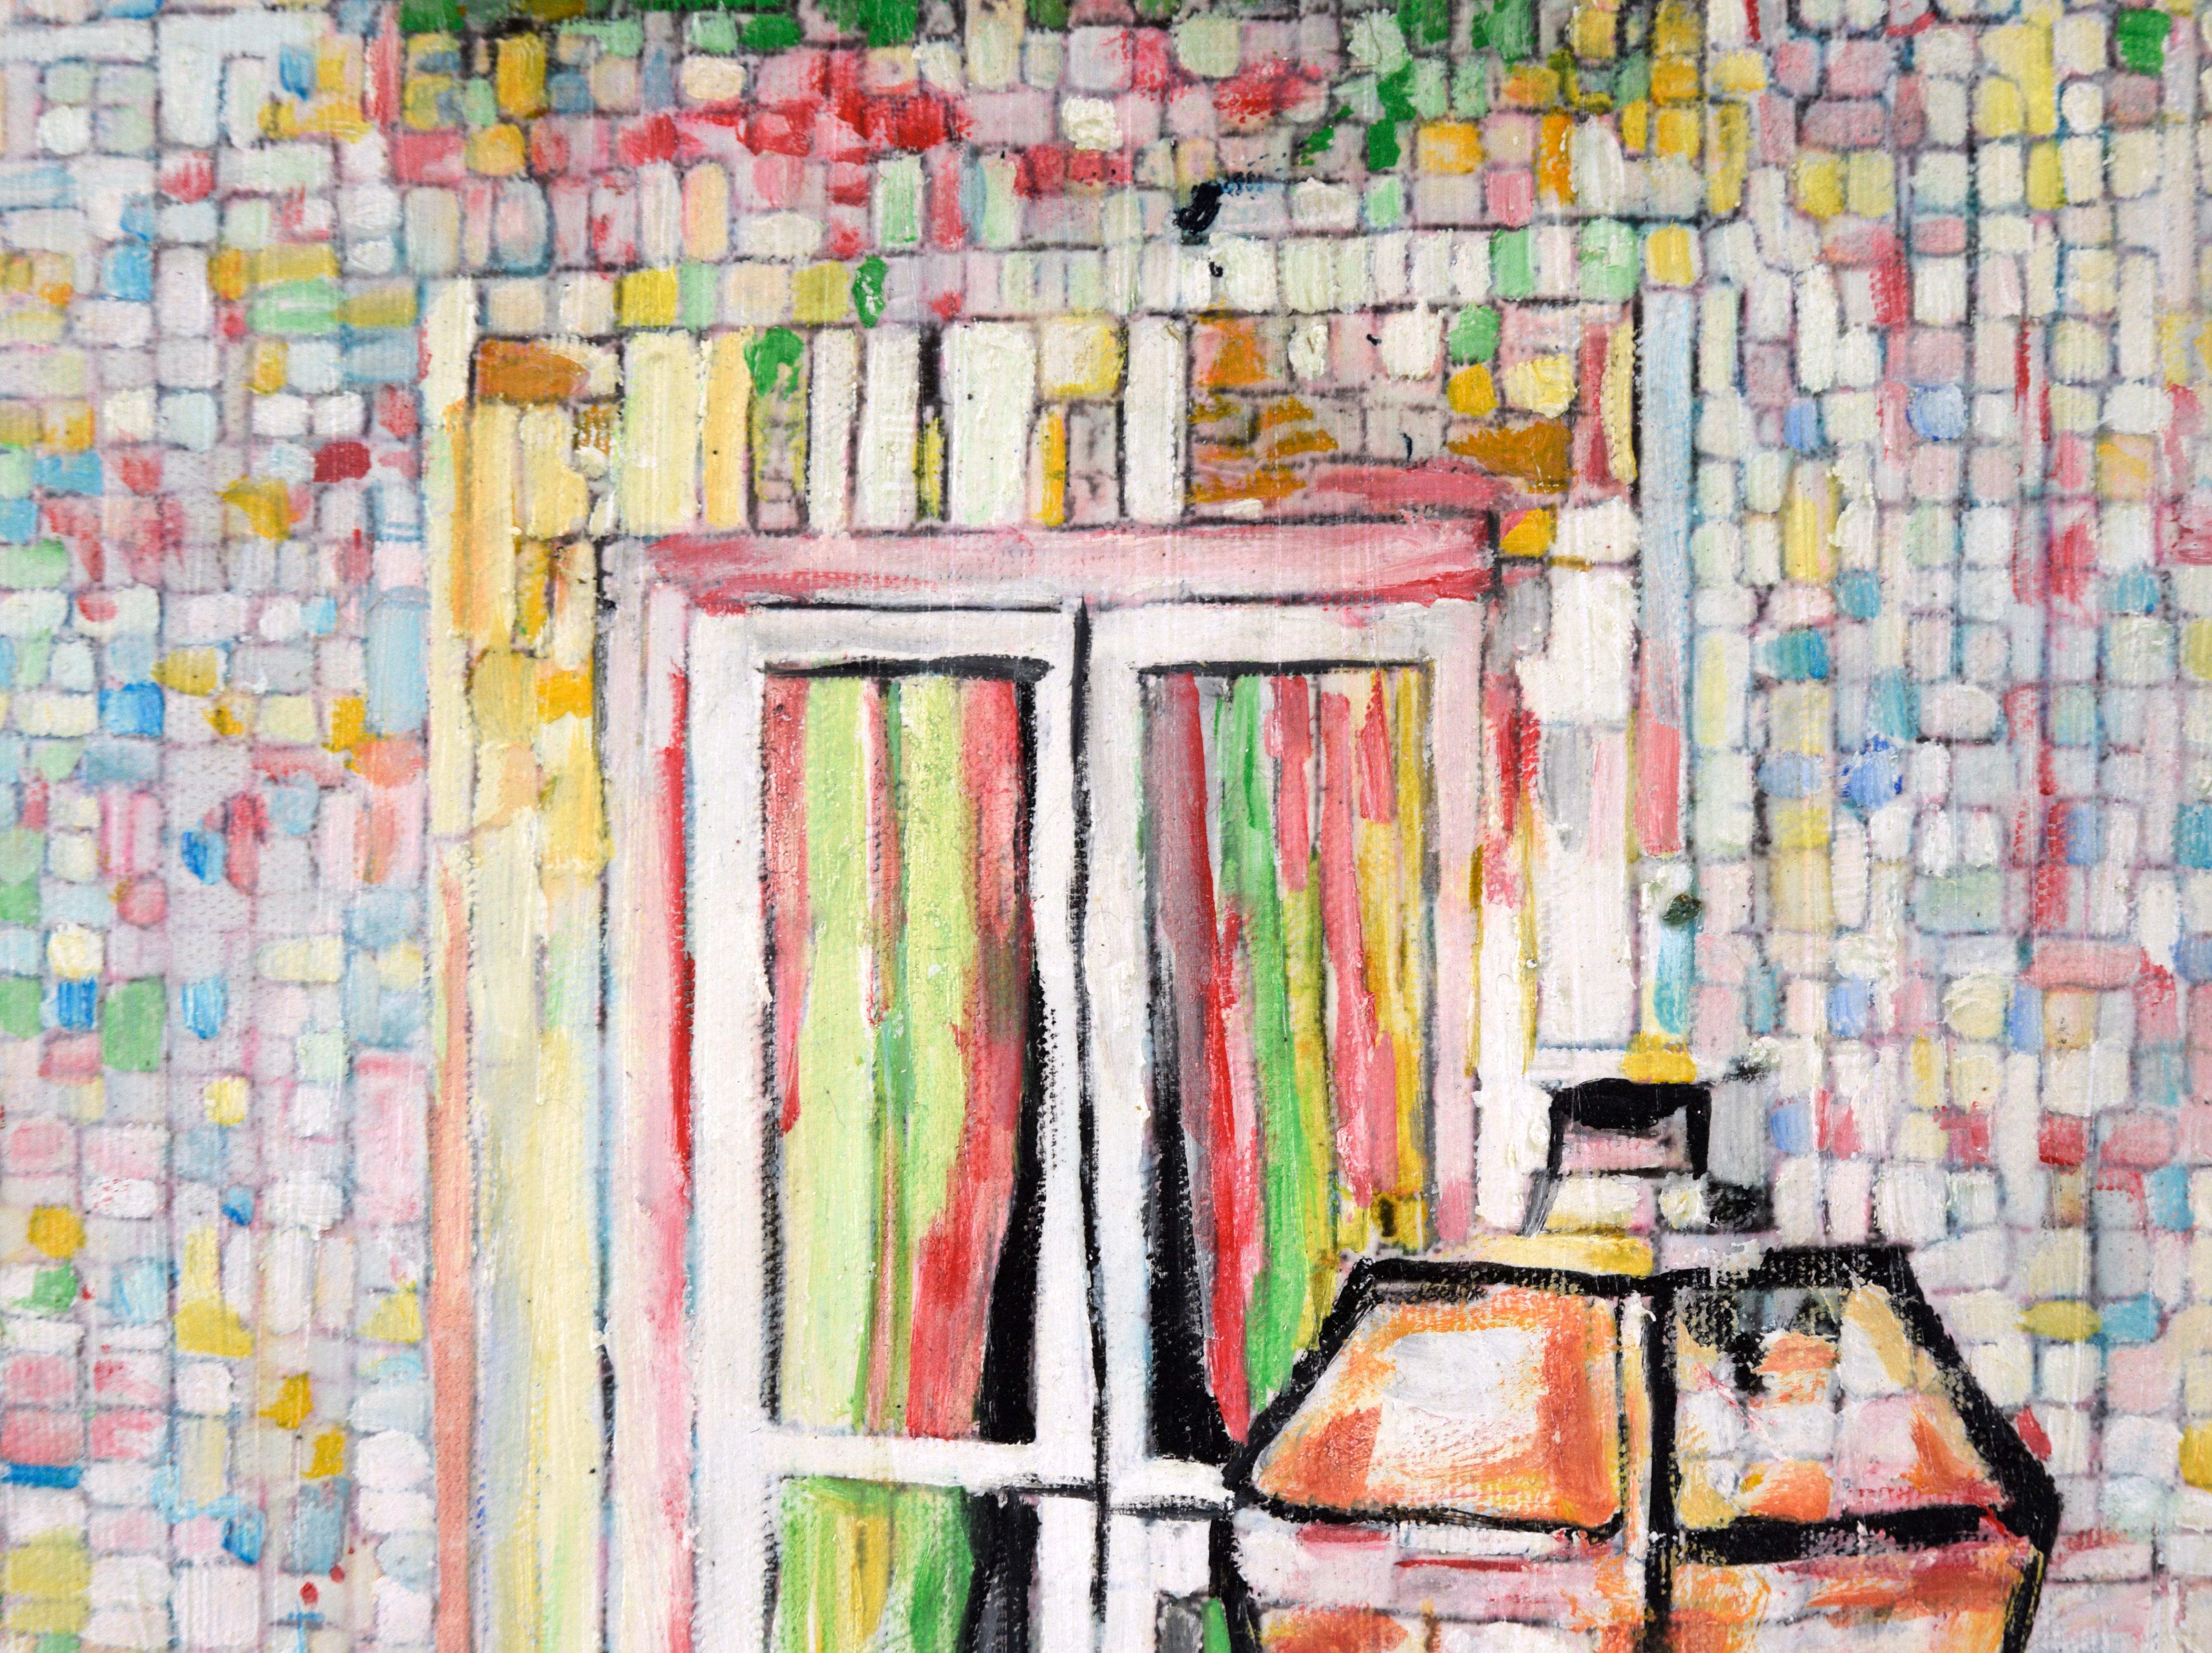 Portuguese Lamp and Window - Contemporary Painting by Ana Doolin